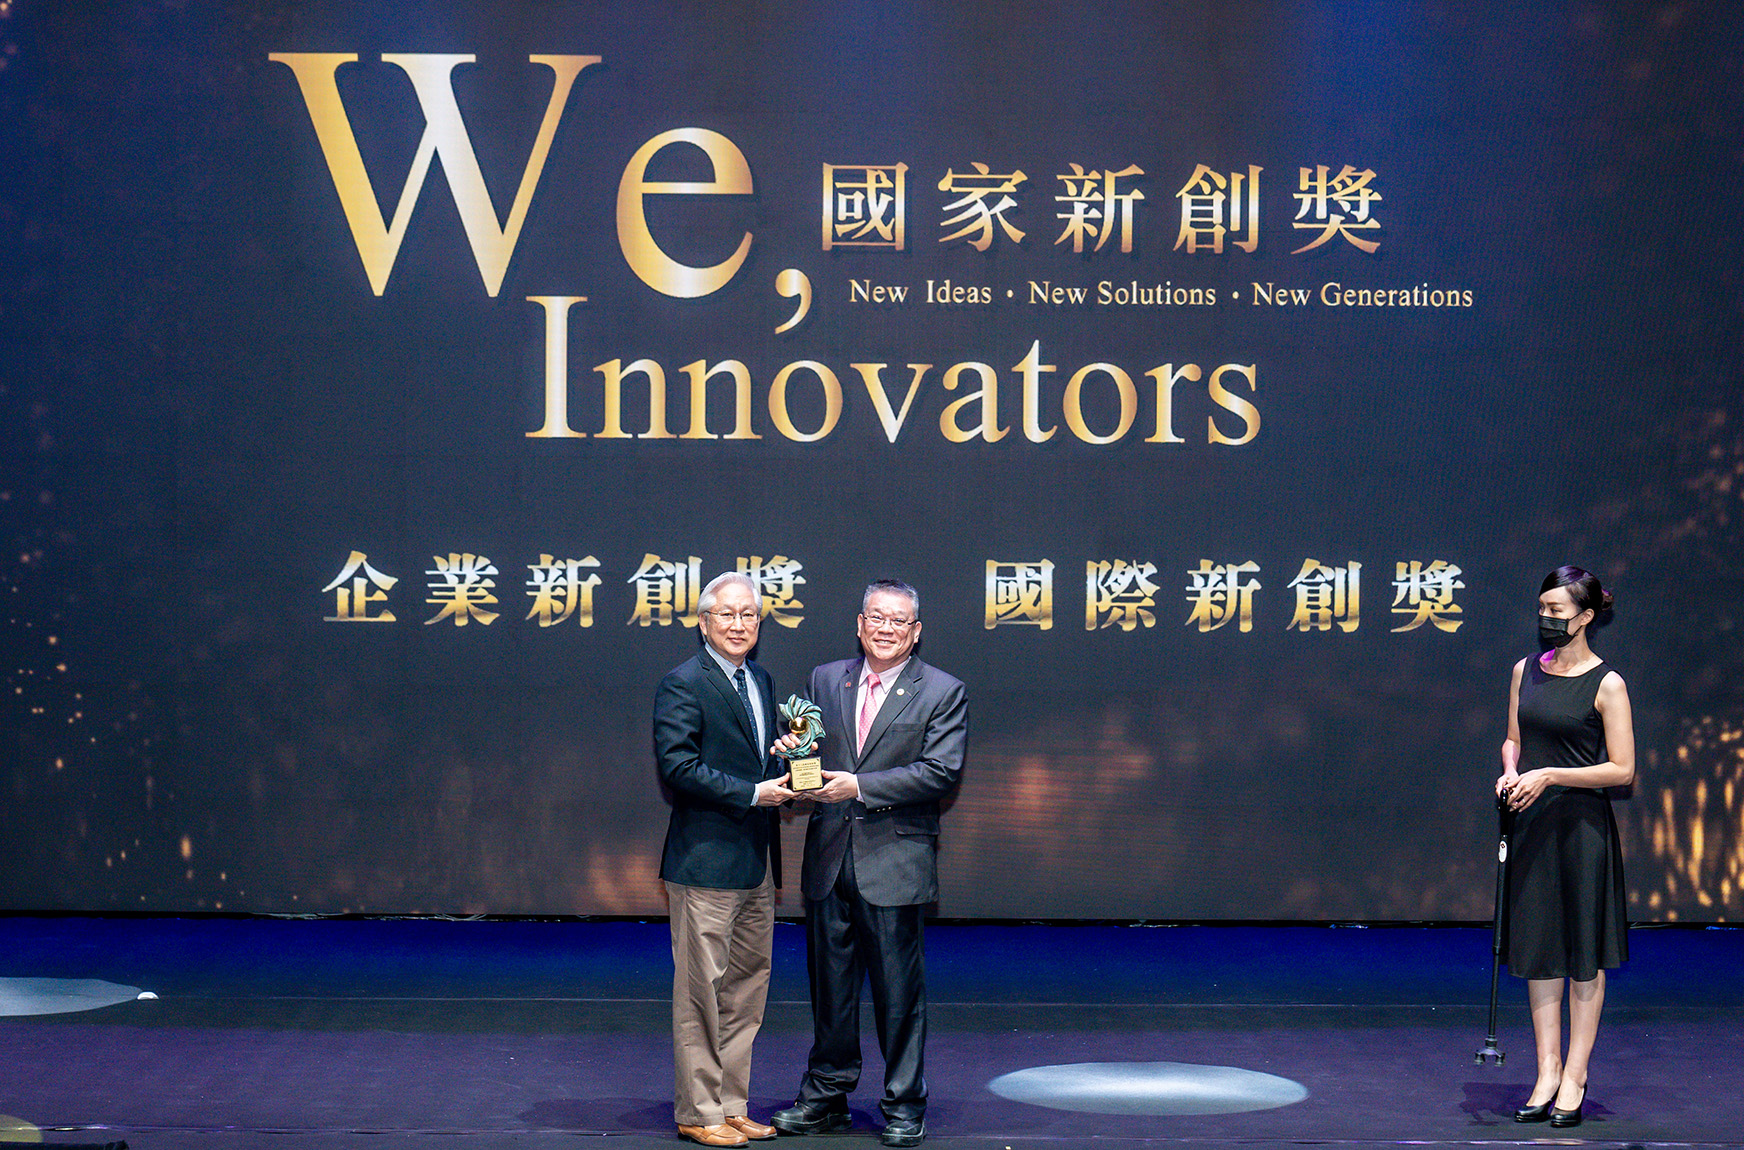 ACRO Biomedical's Proprietary Extraction Technology Won the National Innovation Award